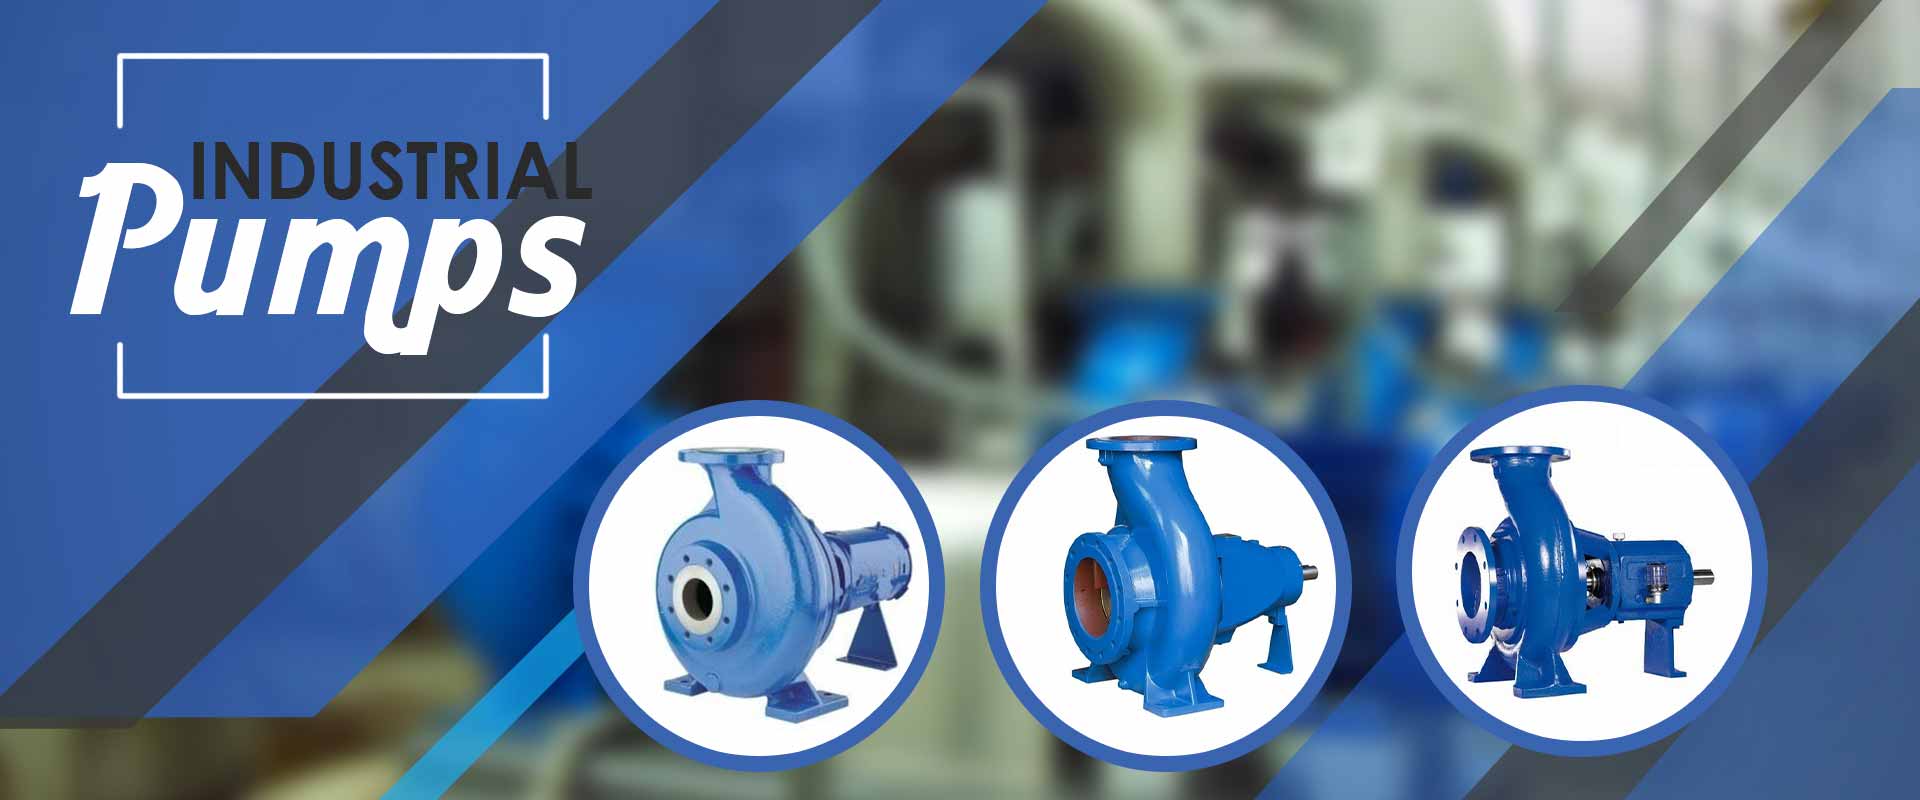 Industrial Pumps Manufacturers In Oklahoma